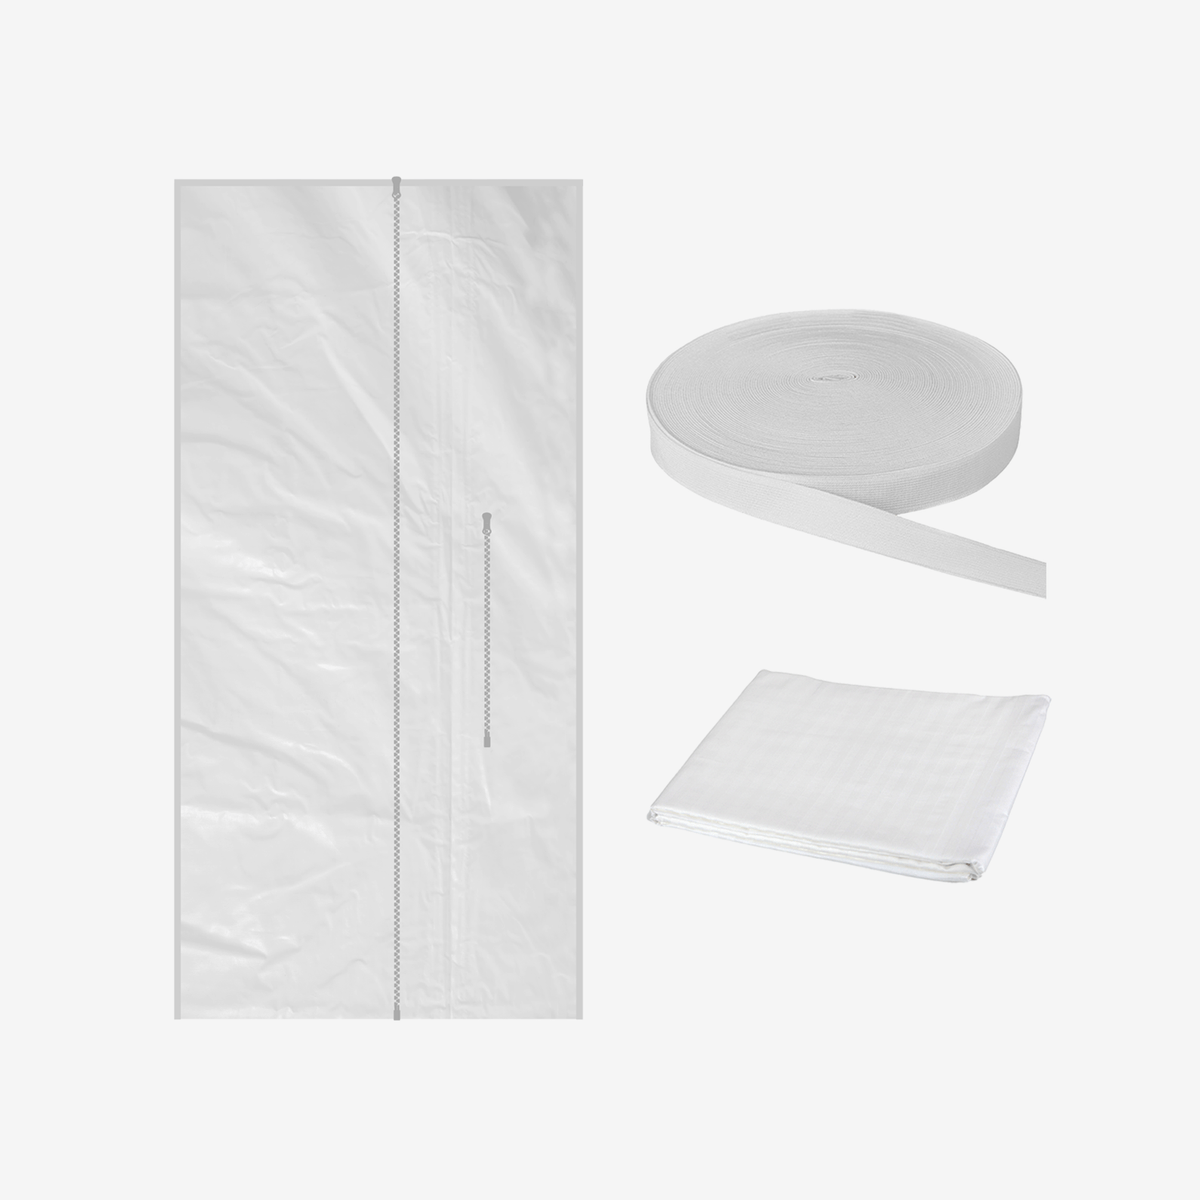 Universal Sliding Door Seal Kit for Portable Air Conditioner